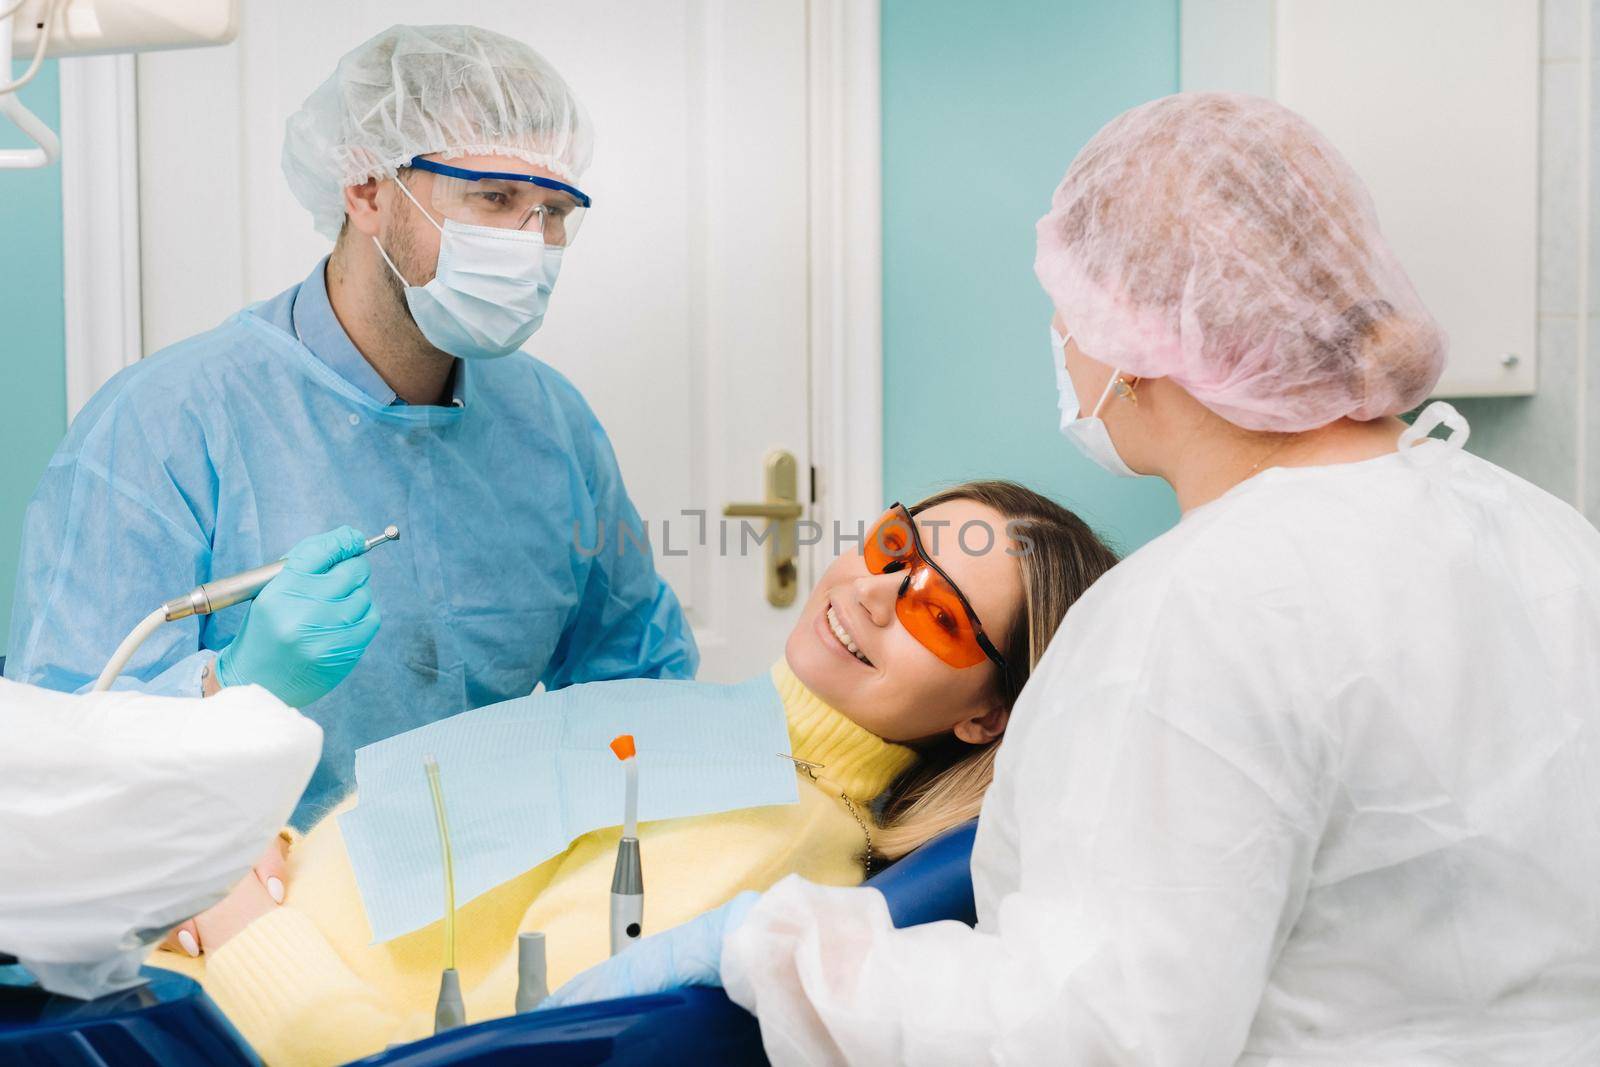 The patient smiles in the dentist's chair in a protective mask and instrument before treatment in the dental office.